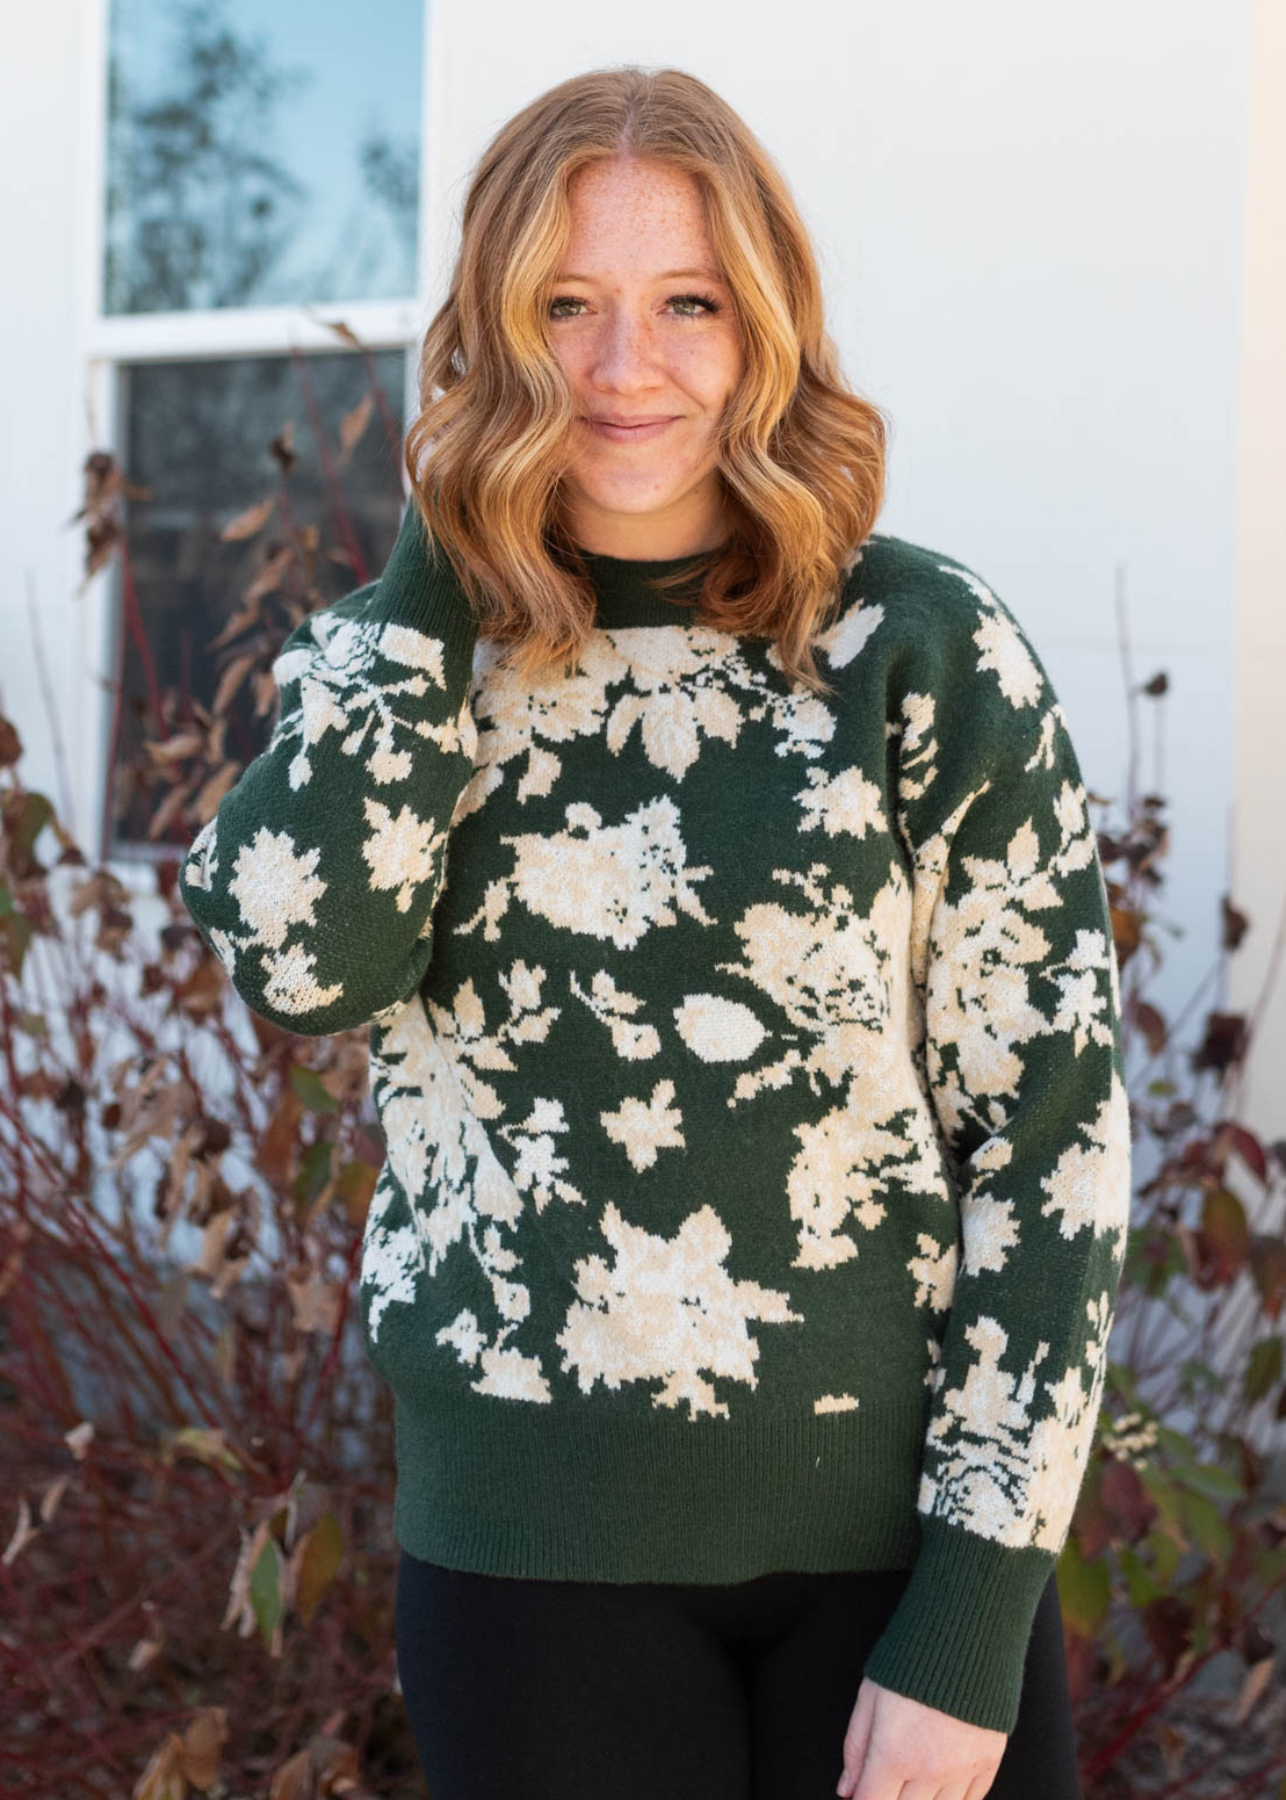 Green floral sweater with cream flowers